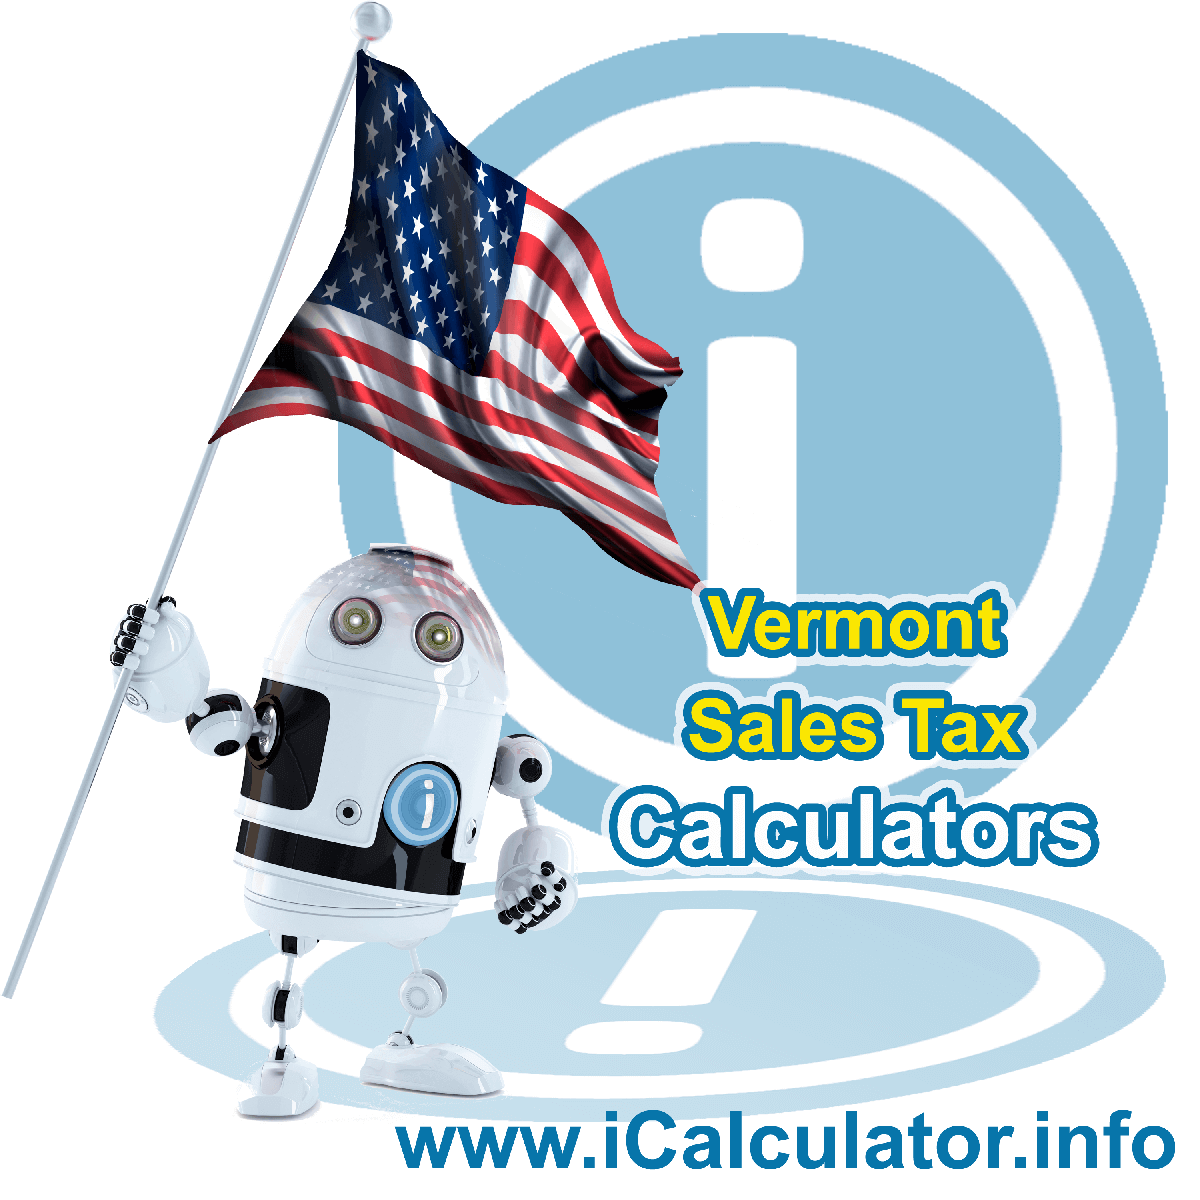 Manchester Sales Rates: This image illustrates a calculator robot calculating Manchester sales tax manually using the Manchester Sales Tax Formula. You can use this information to calculate Manchester Sales Tax manually or use the Manchester Sales Tax Calculator to calculate sales tax online.